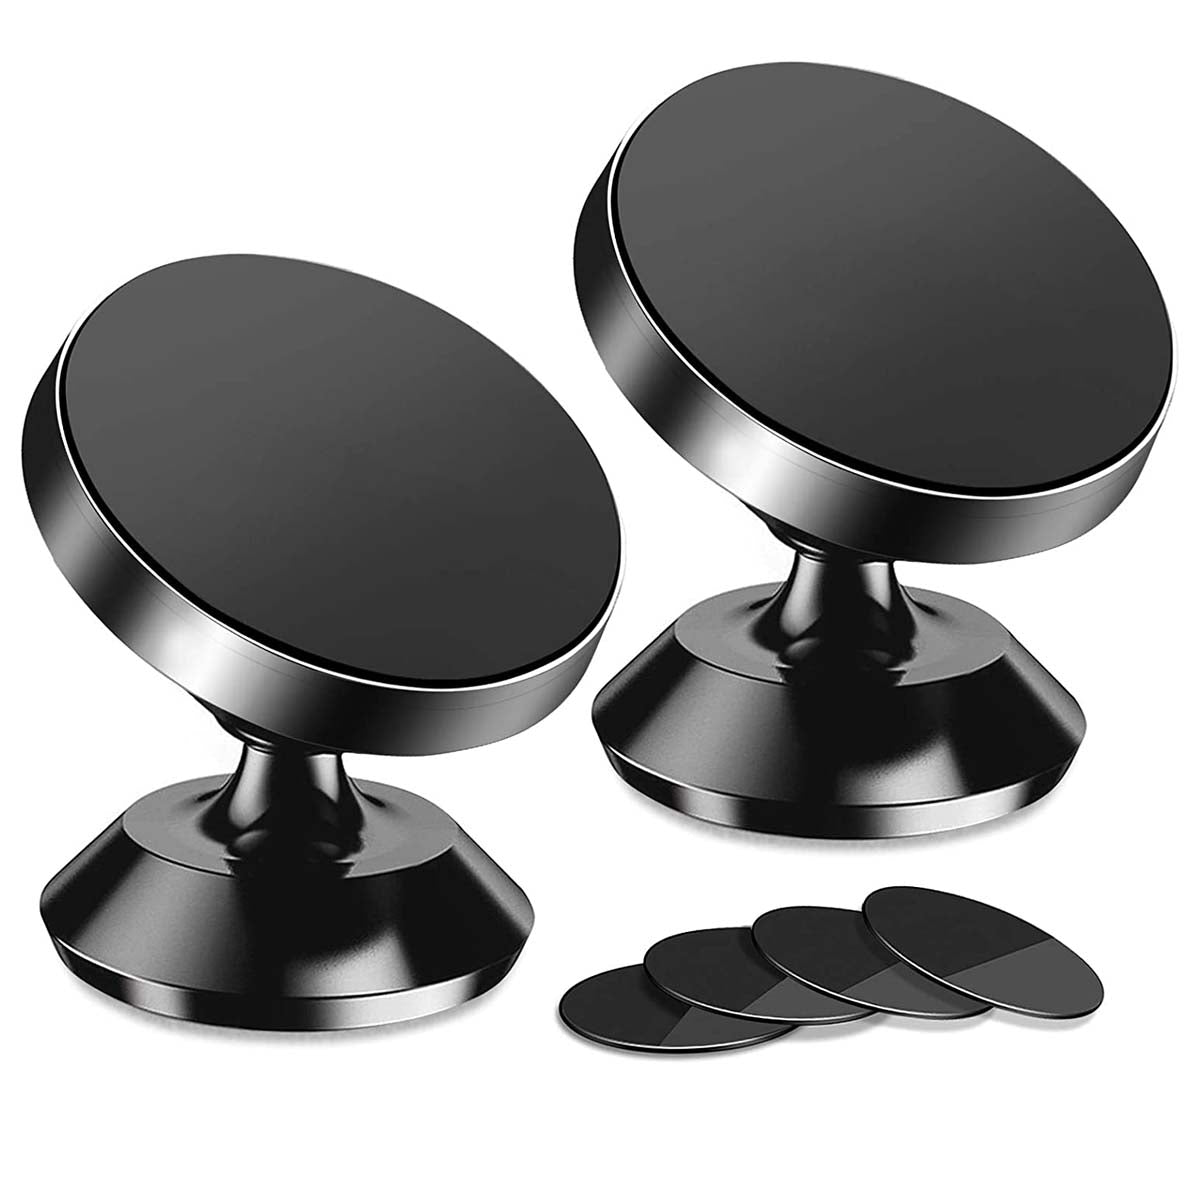 [2 Pack ] Magnetic Phone Mount, Custom For Cars, [ Super Strong Magnet ] [ with 4 Metal Plate ] car Magnetic Phone Holder, [ 360° Rotation ] Universal Dashboard car Mount Fits All Cell Phones, Car Accessories WQ13982